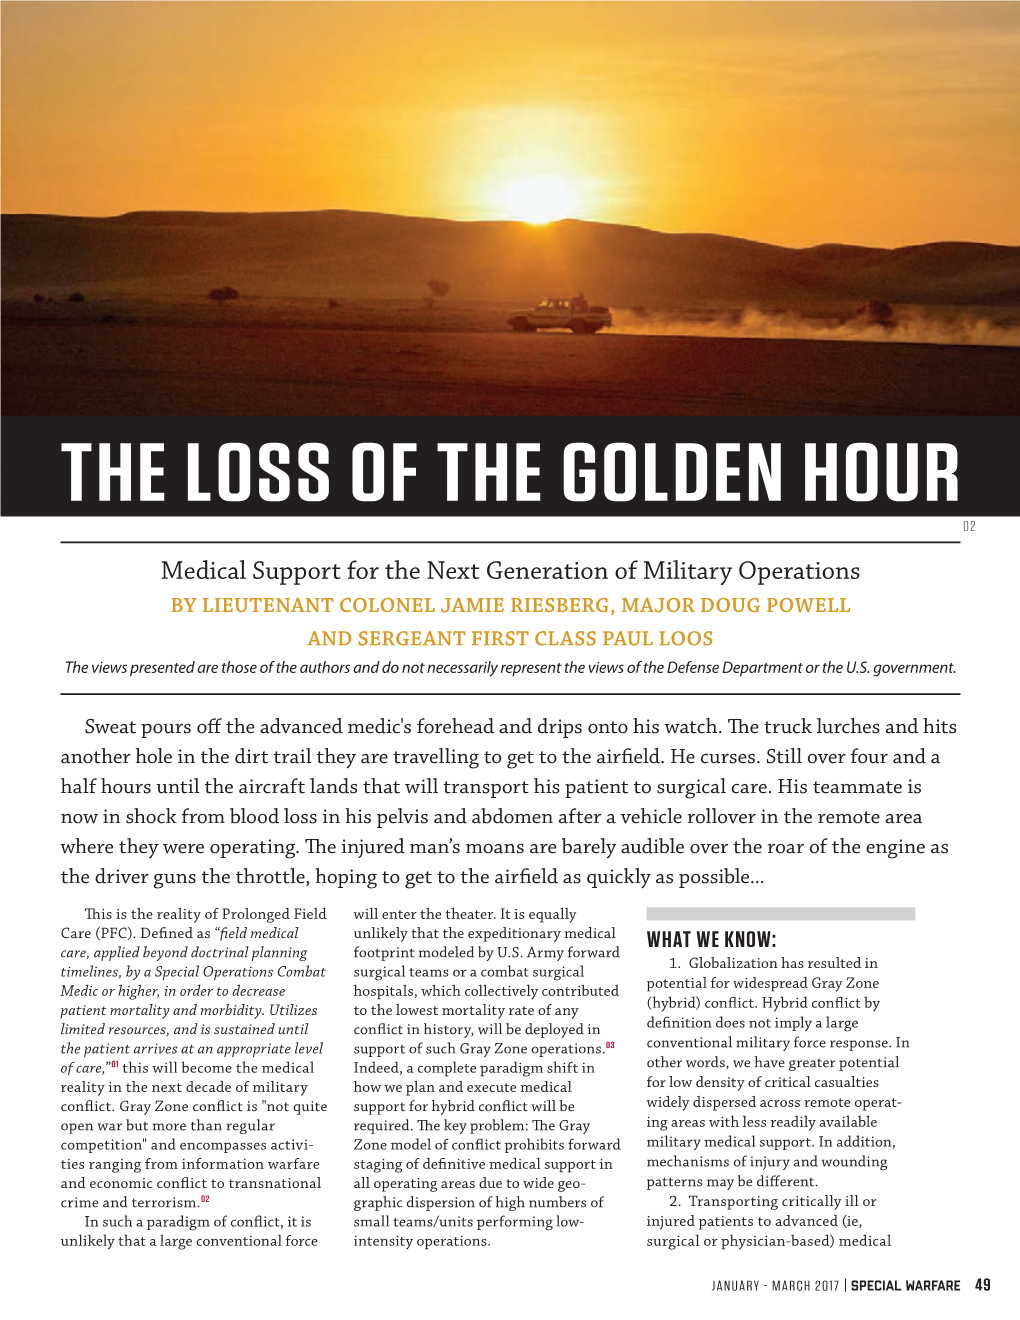 The Loss of the Golden Hour